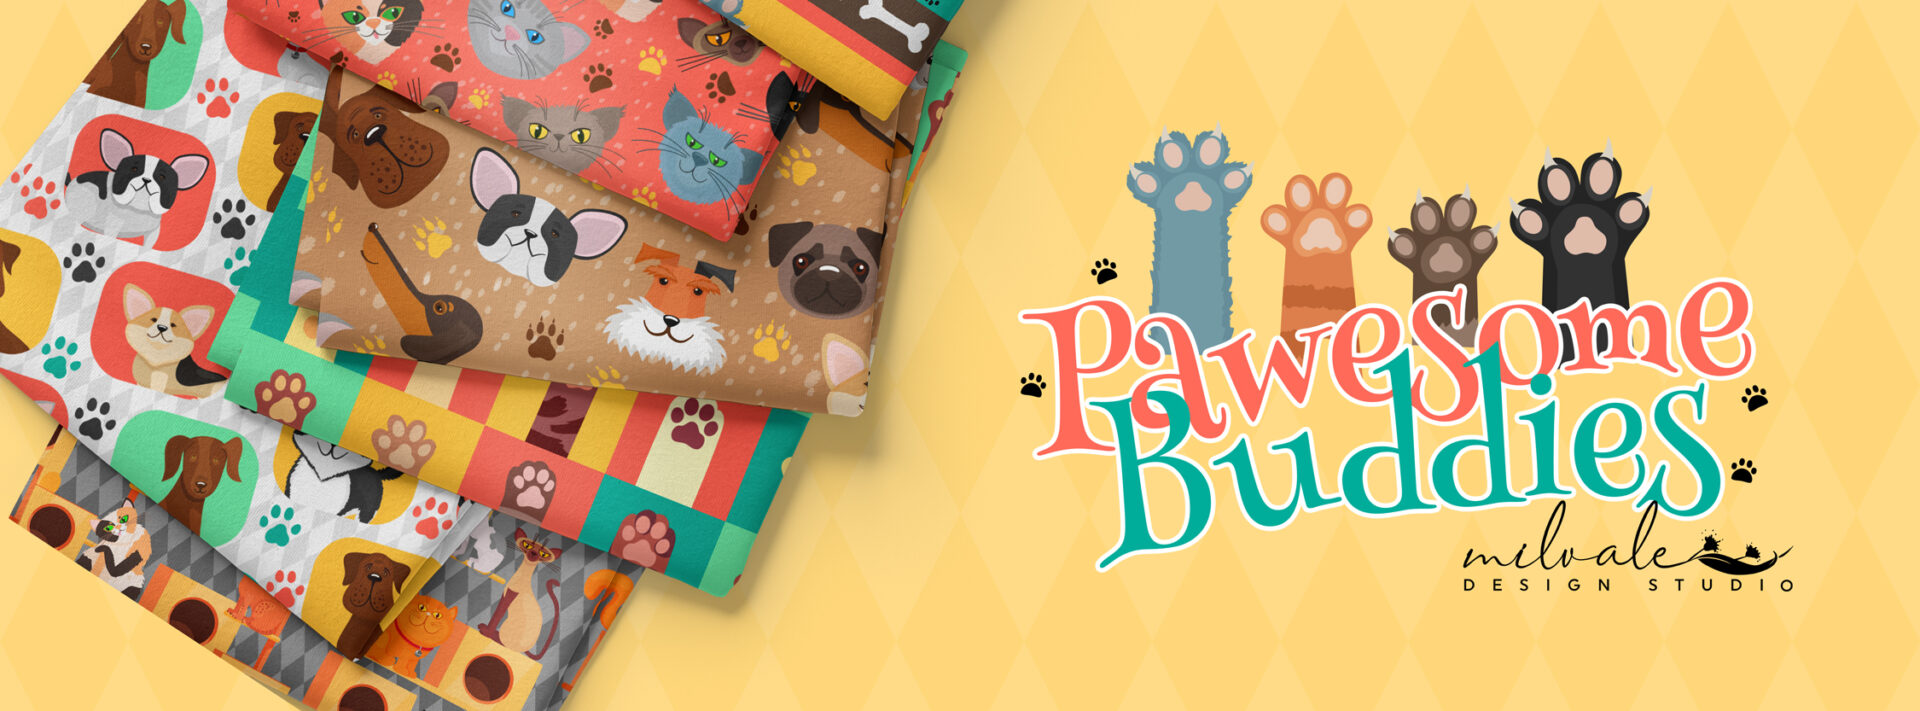 Banner - Pawesome Buddies